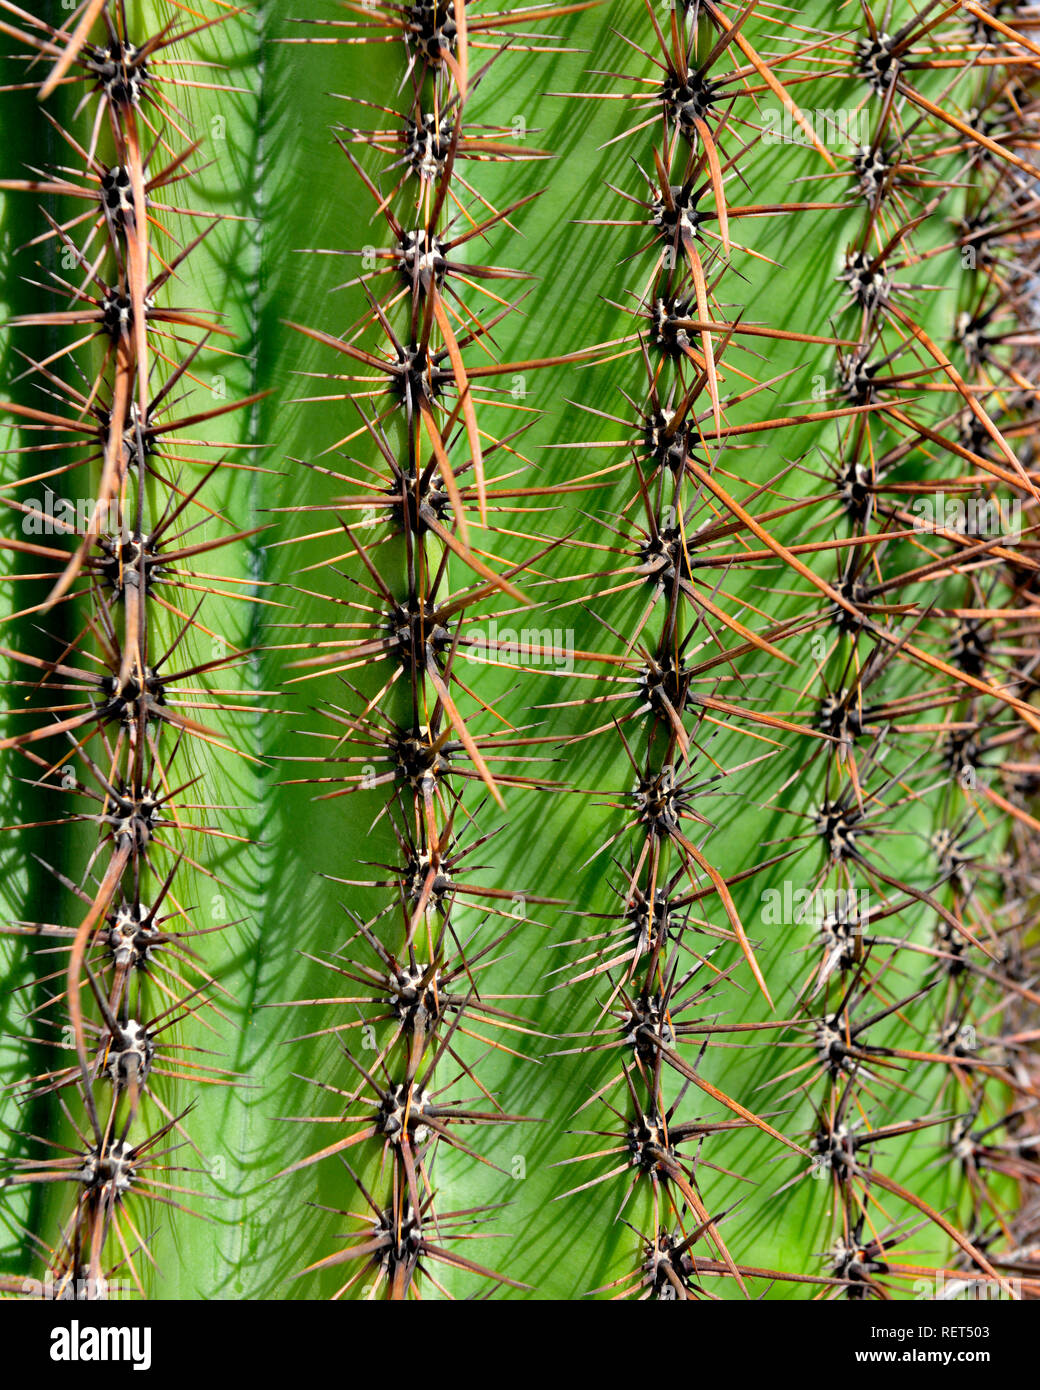 Close-up of saguaro cactus in Arizona showing its spines Stock Photo